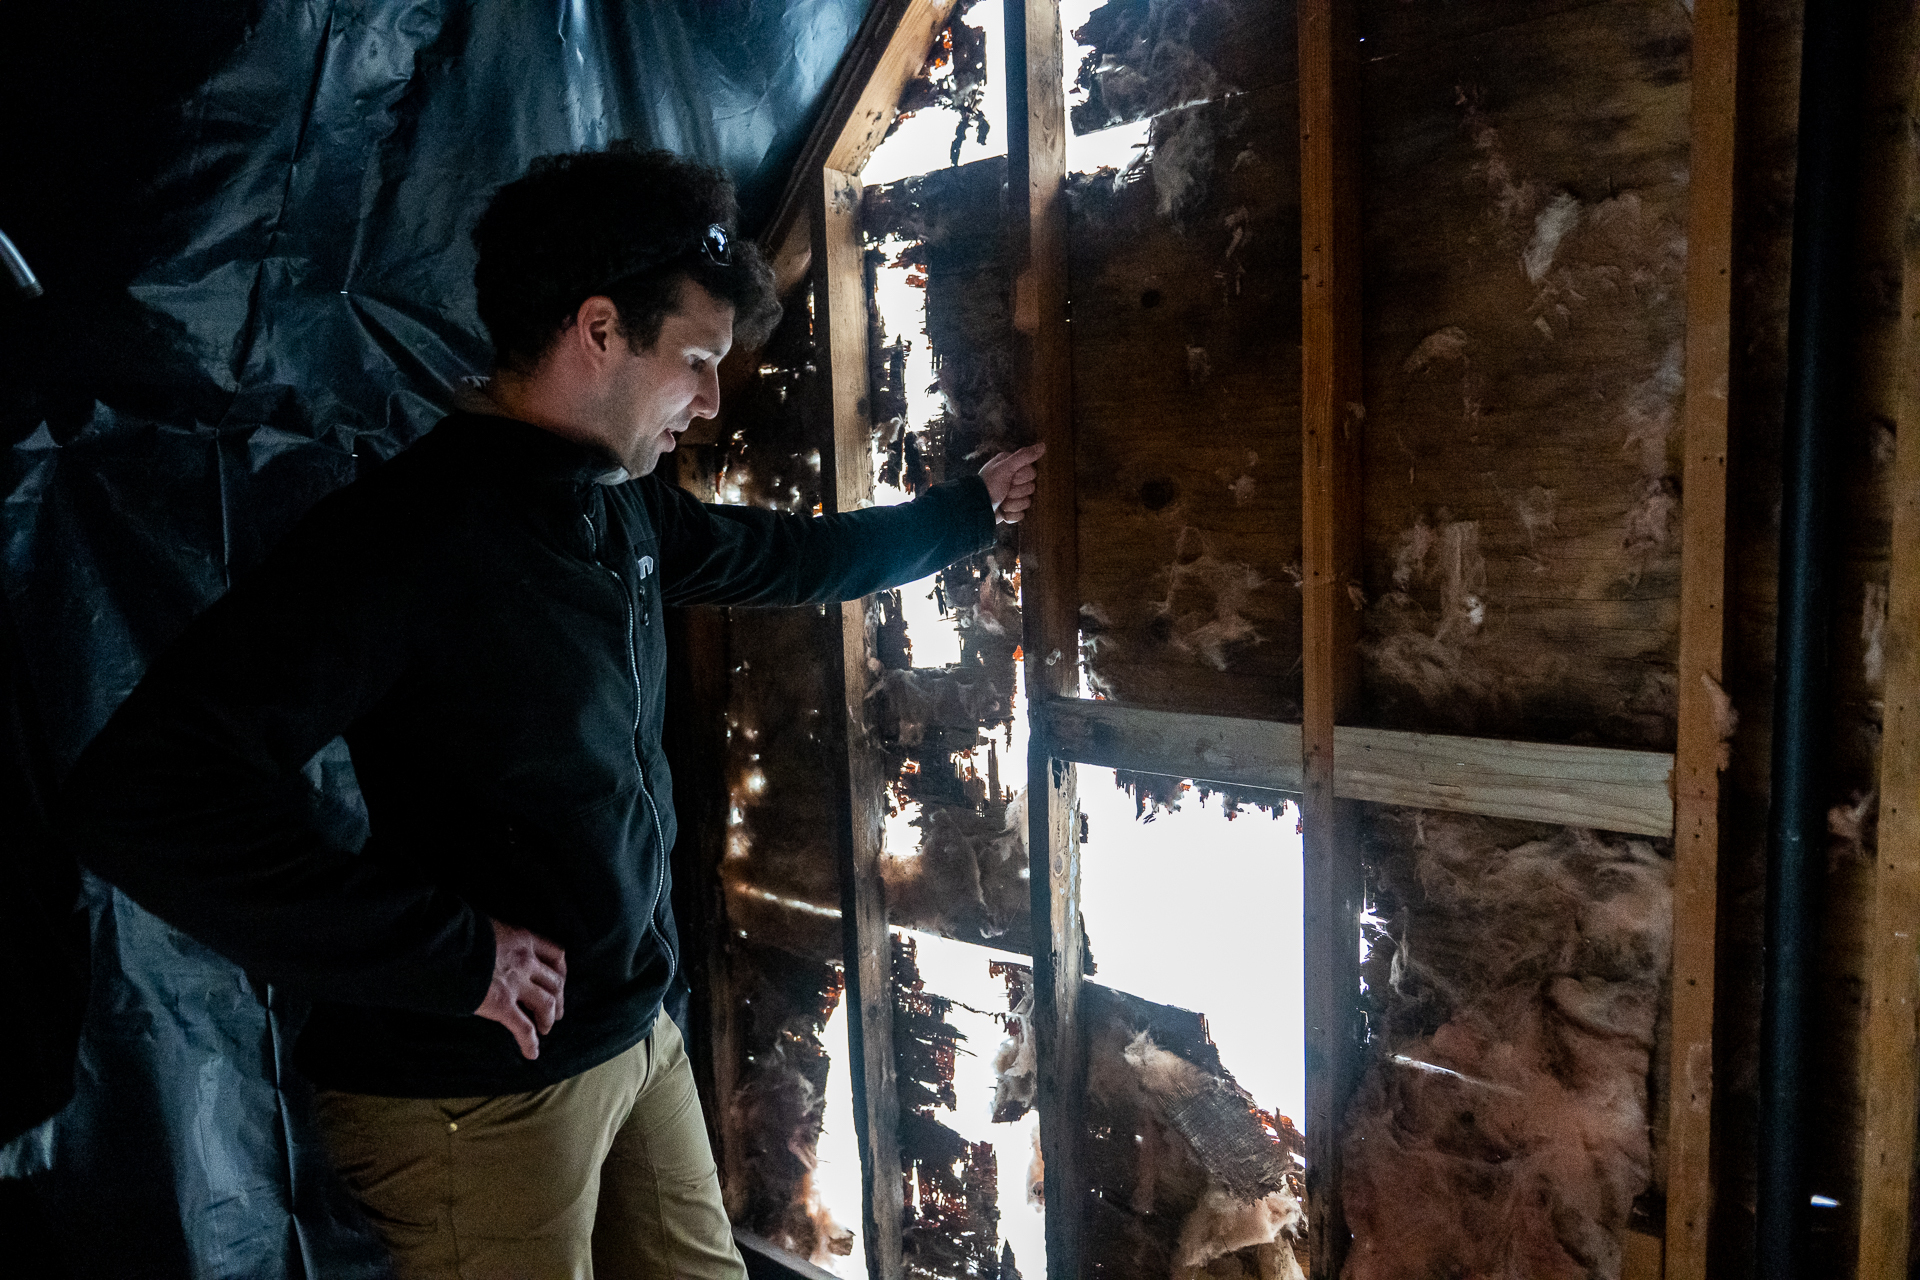 A man in a black, zip-up sweater stands inside a dilapidated house where the walls have enormous holes and is in need of heavy repairs. He peers down through one of the openings with one hand on his right hip.